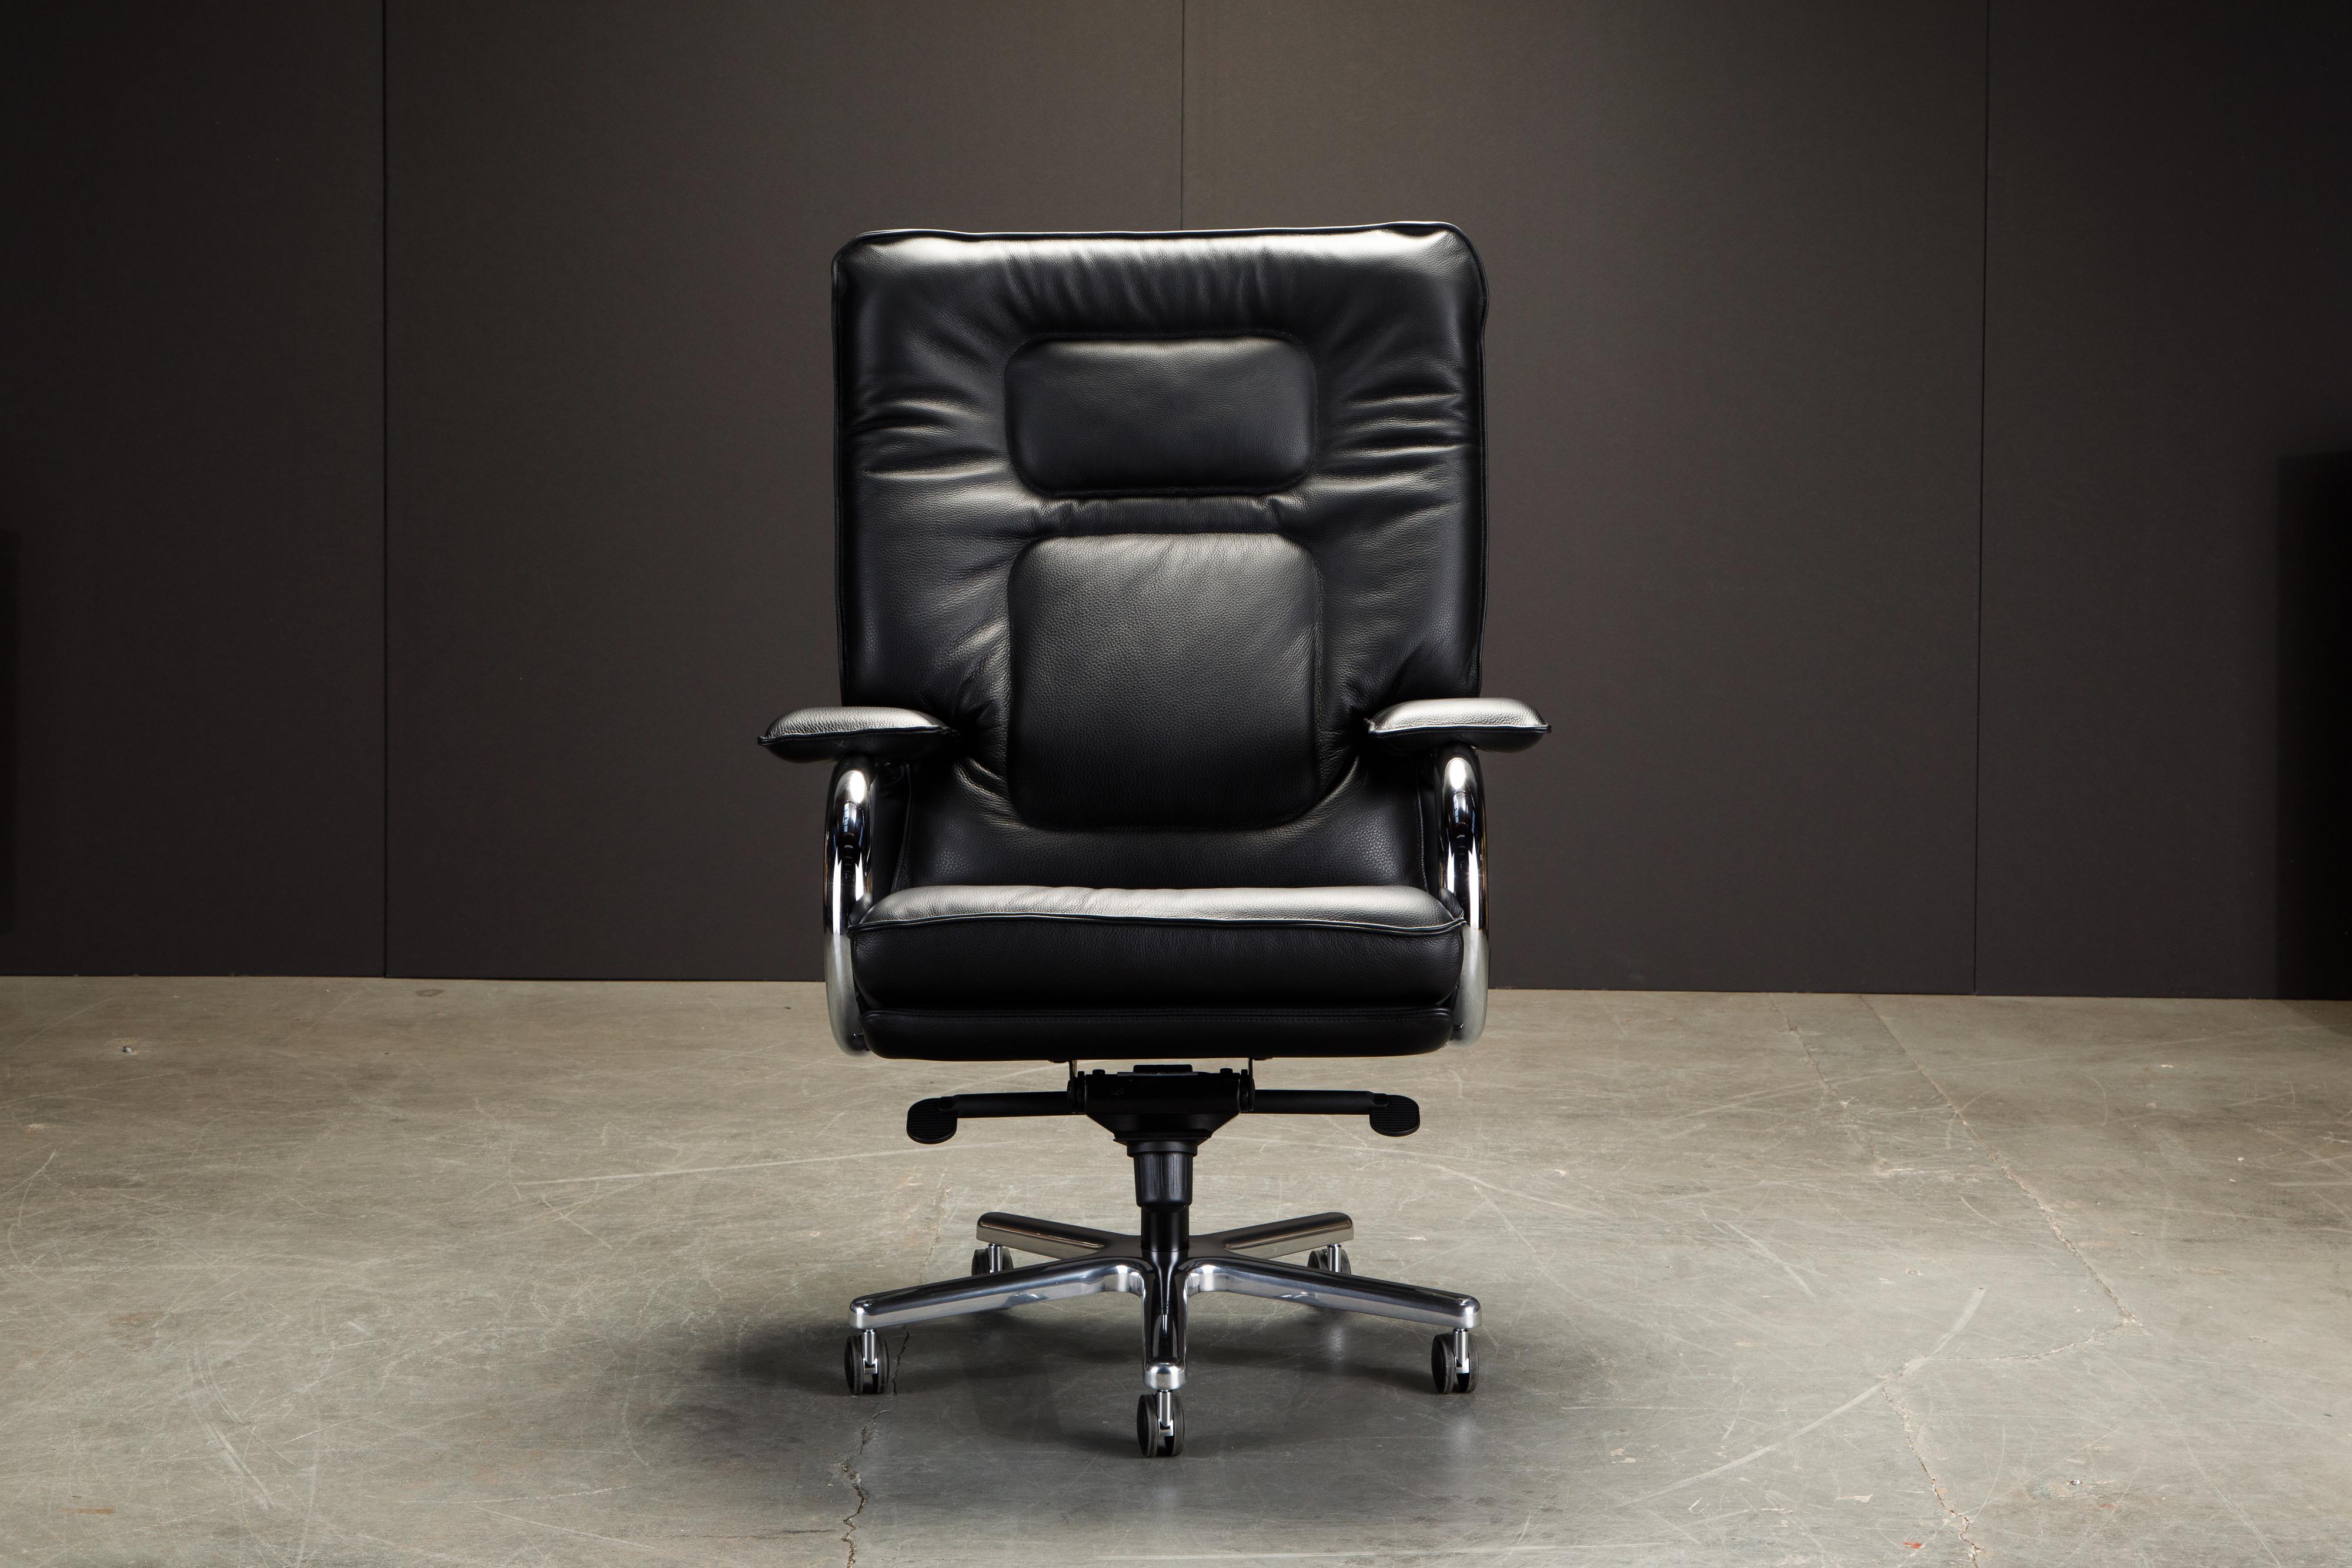 This incredible executives chair is named 'Big', designed by Guido Faleschini by i4 Mariani originally designed in the 1970s, this example newly produced in a gorgeous black leather. 

Such incredible style, no wonder these were featured in the hit